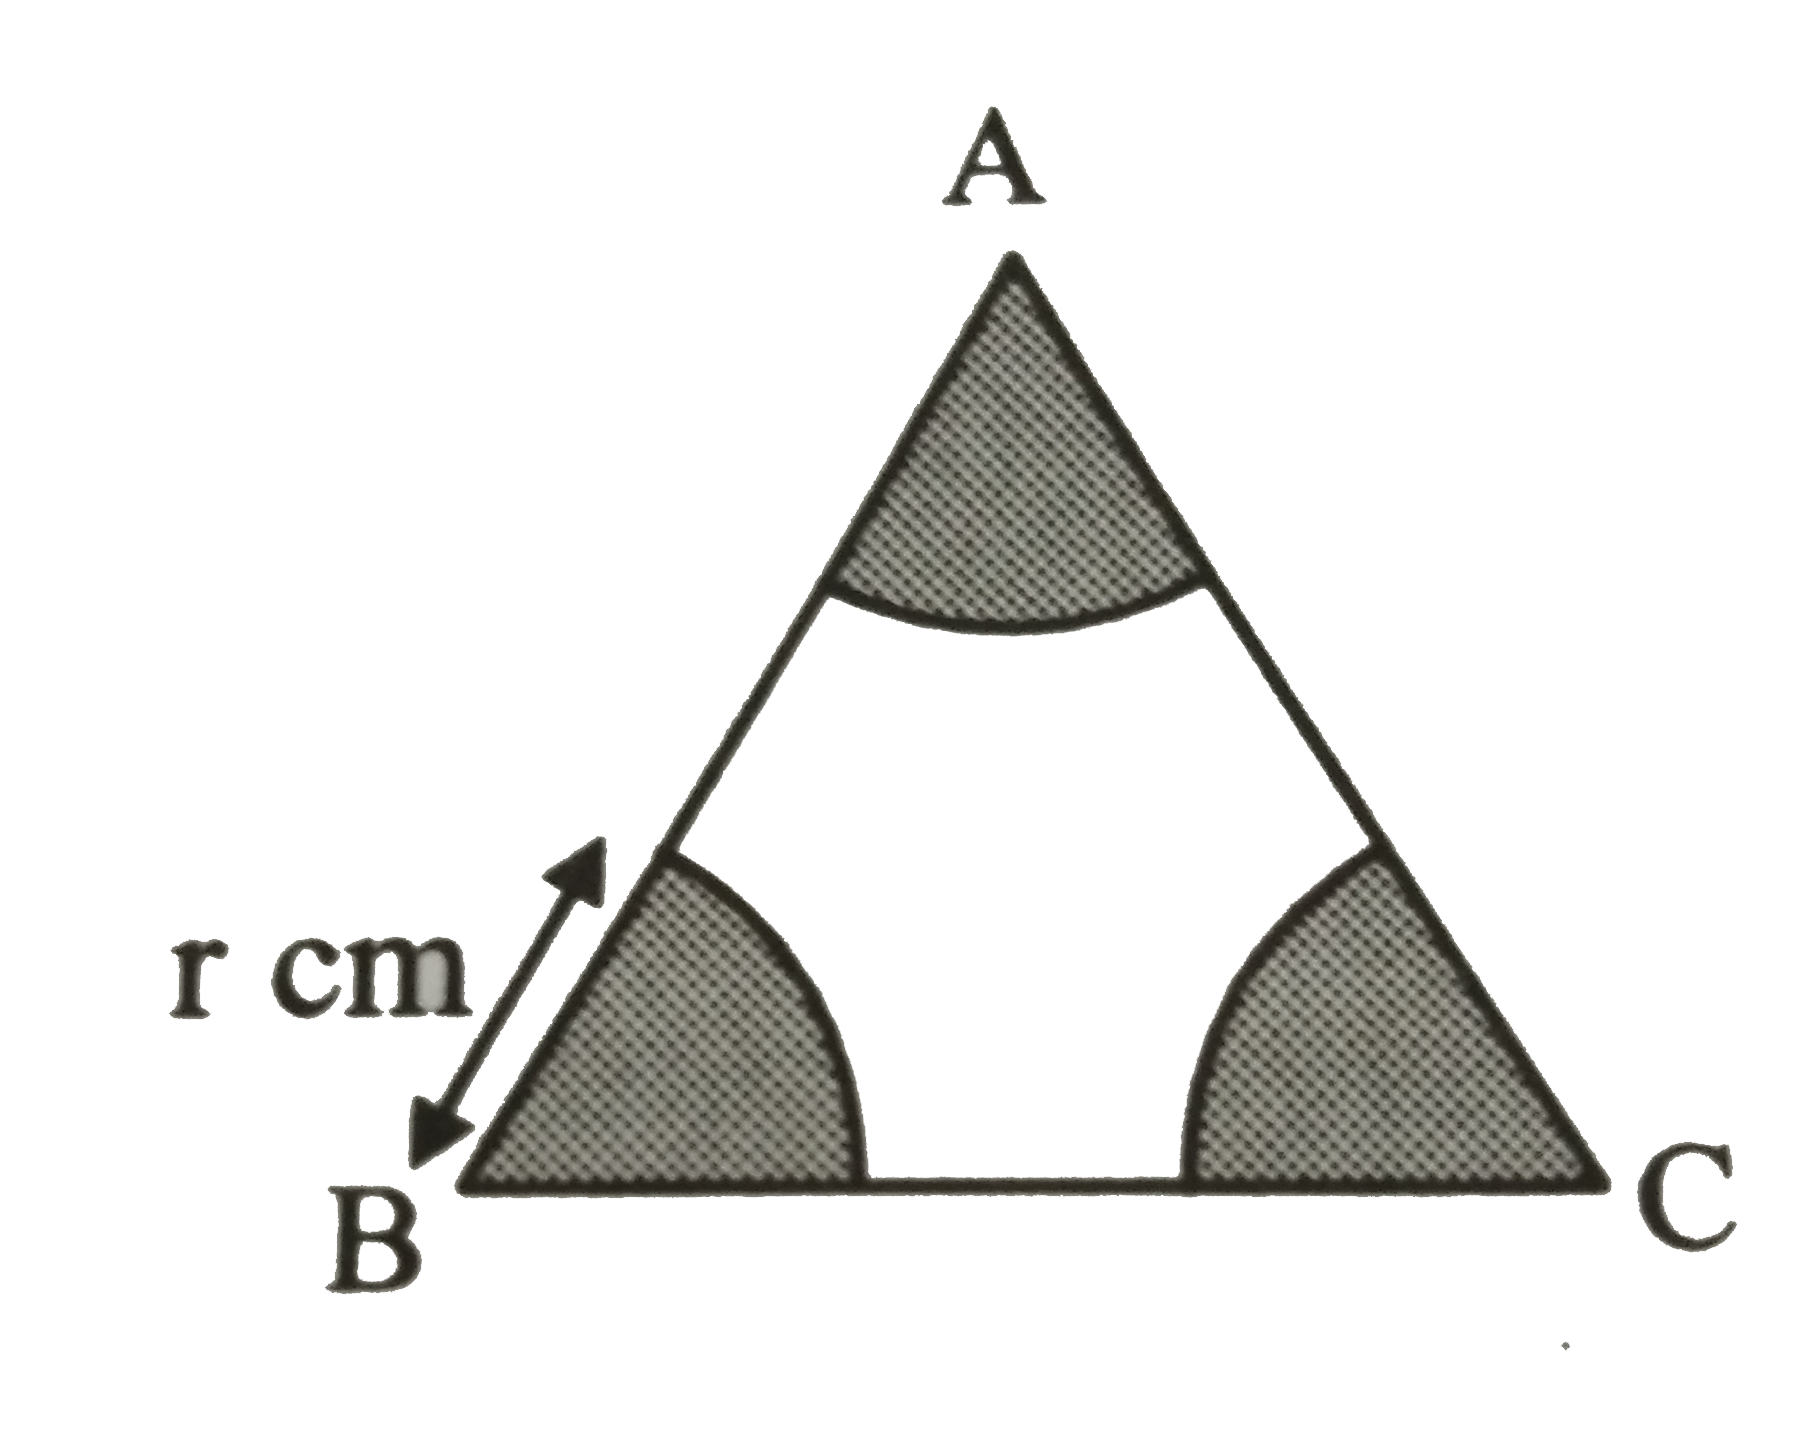 If arcs of radius r cm  are drawn with the   vertices of an equilateral triangle  ABC as shown in the figure,  then the area of the shaded region is